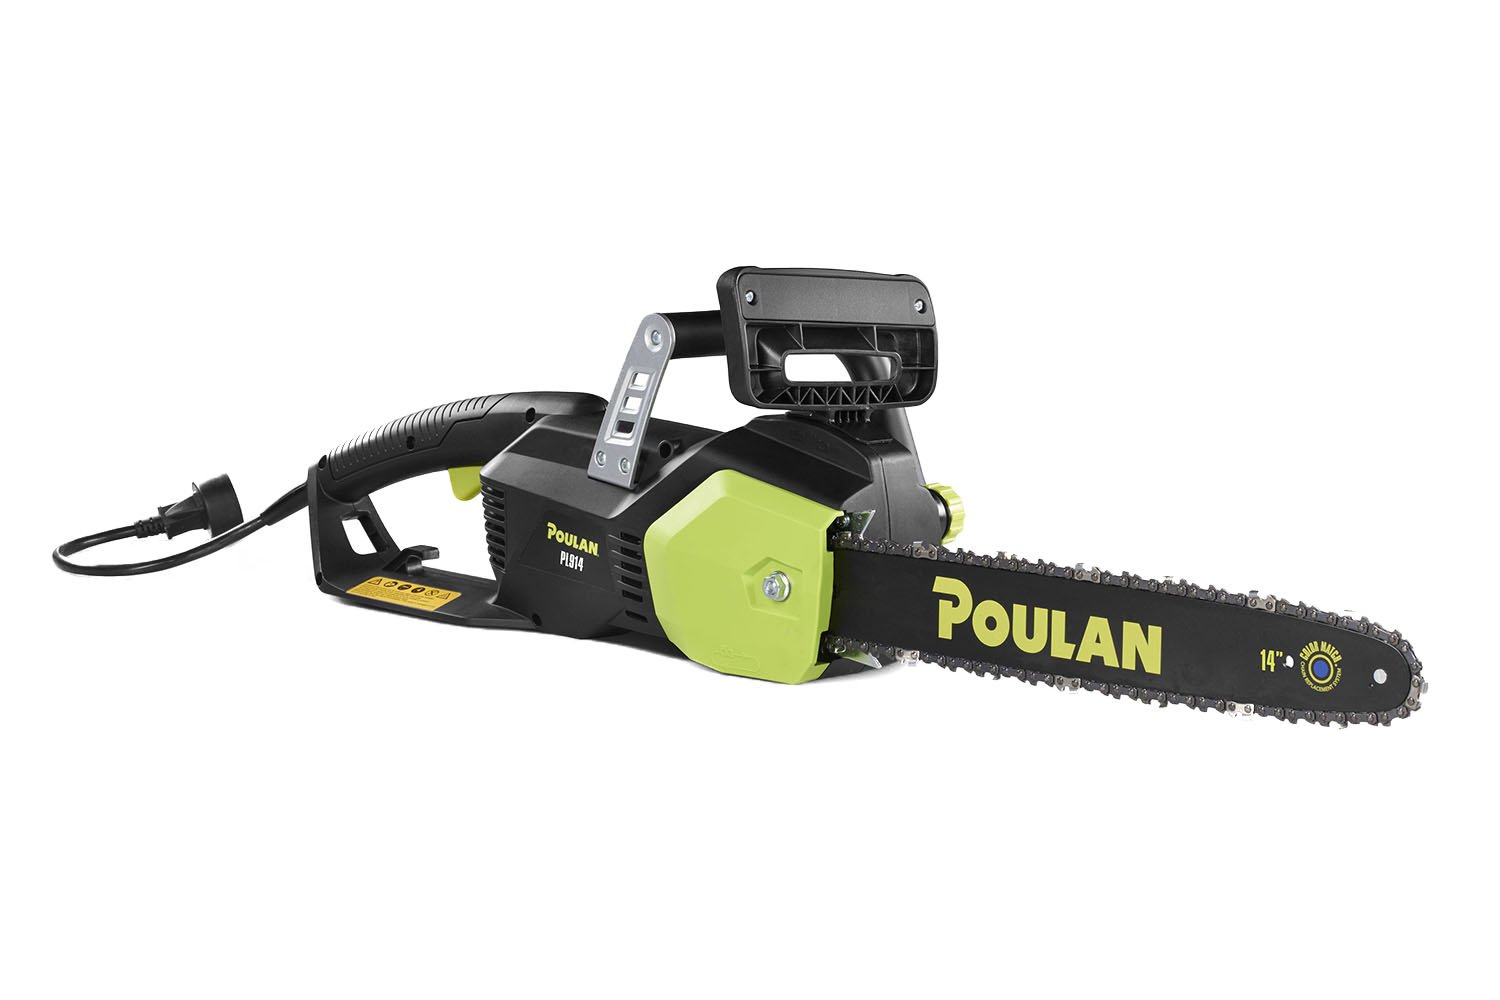 Poulan 14 in. 9-Amp Corded Electric Chainsaw